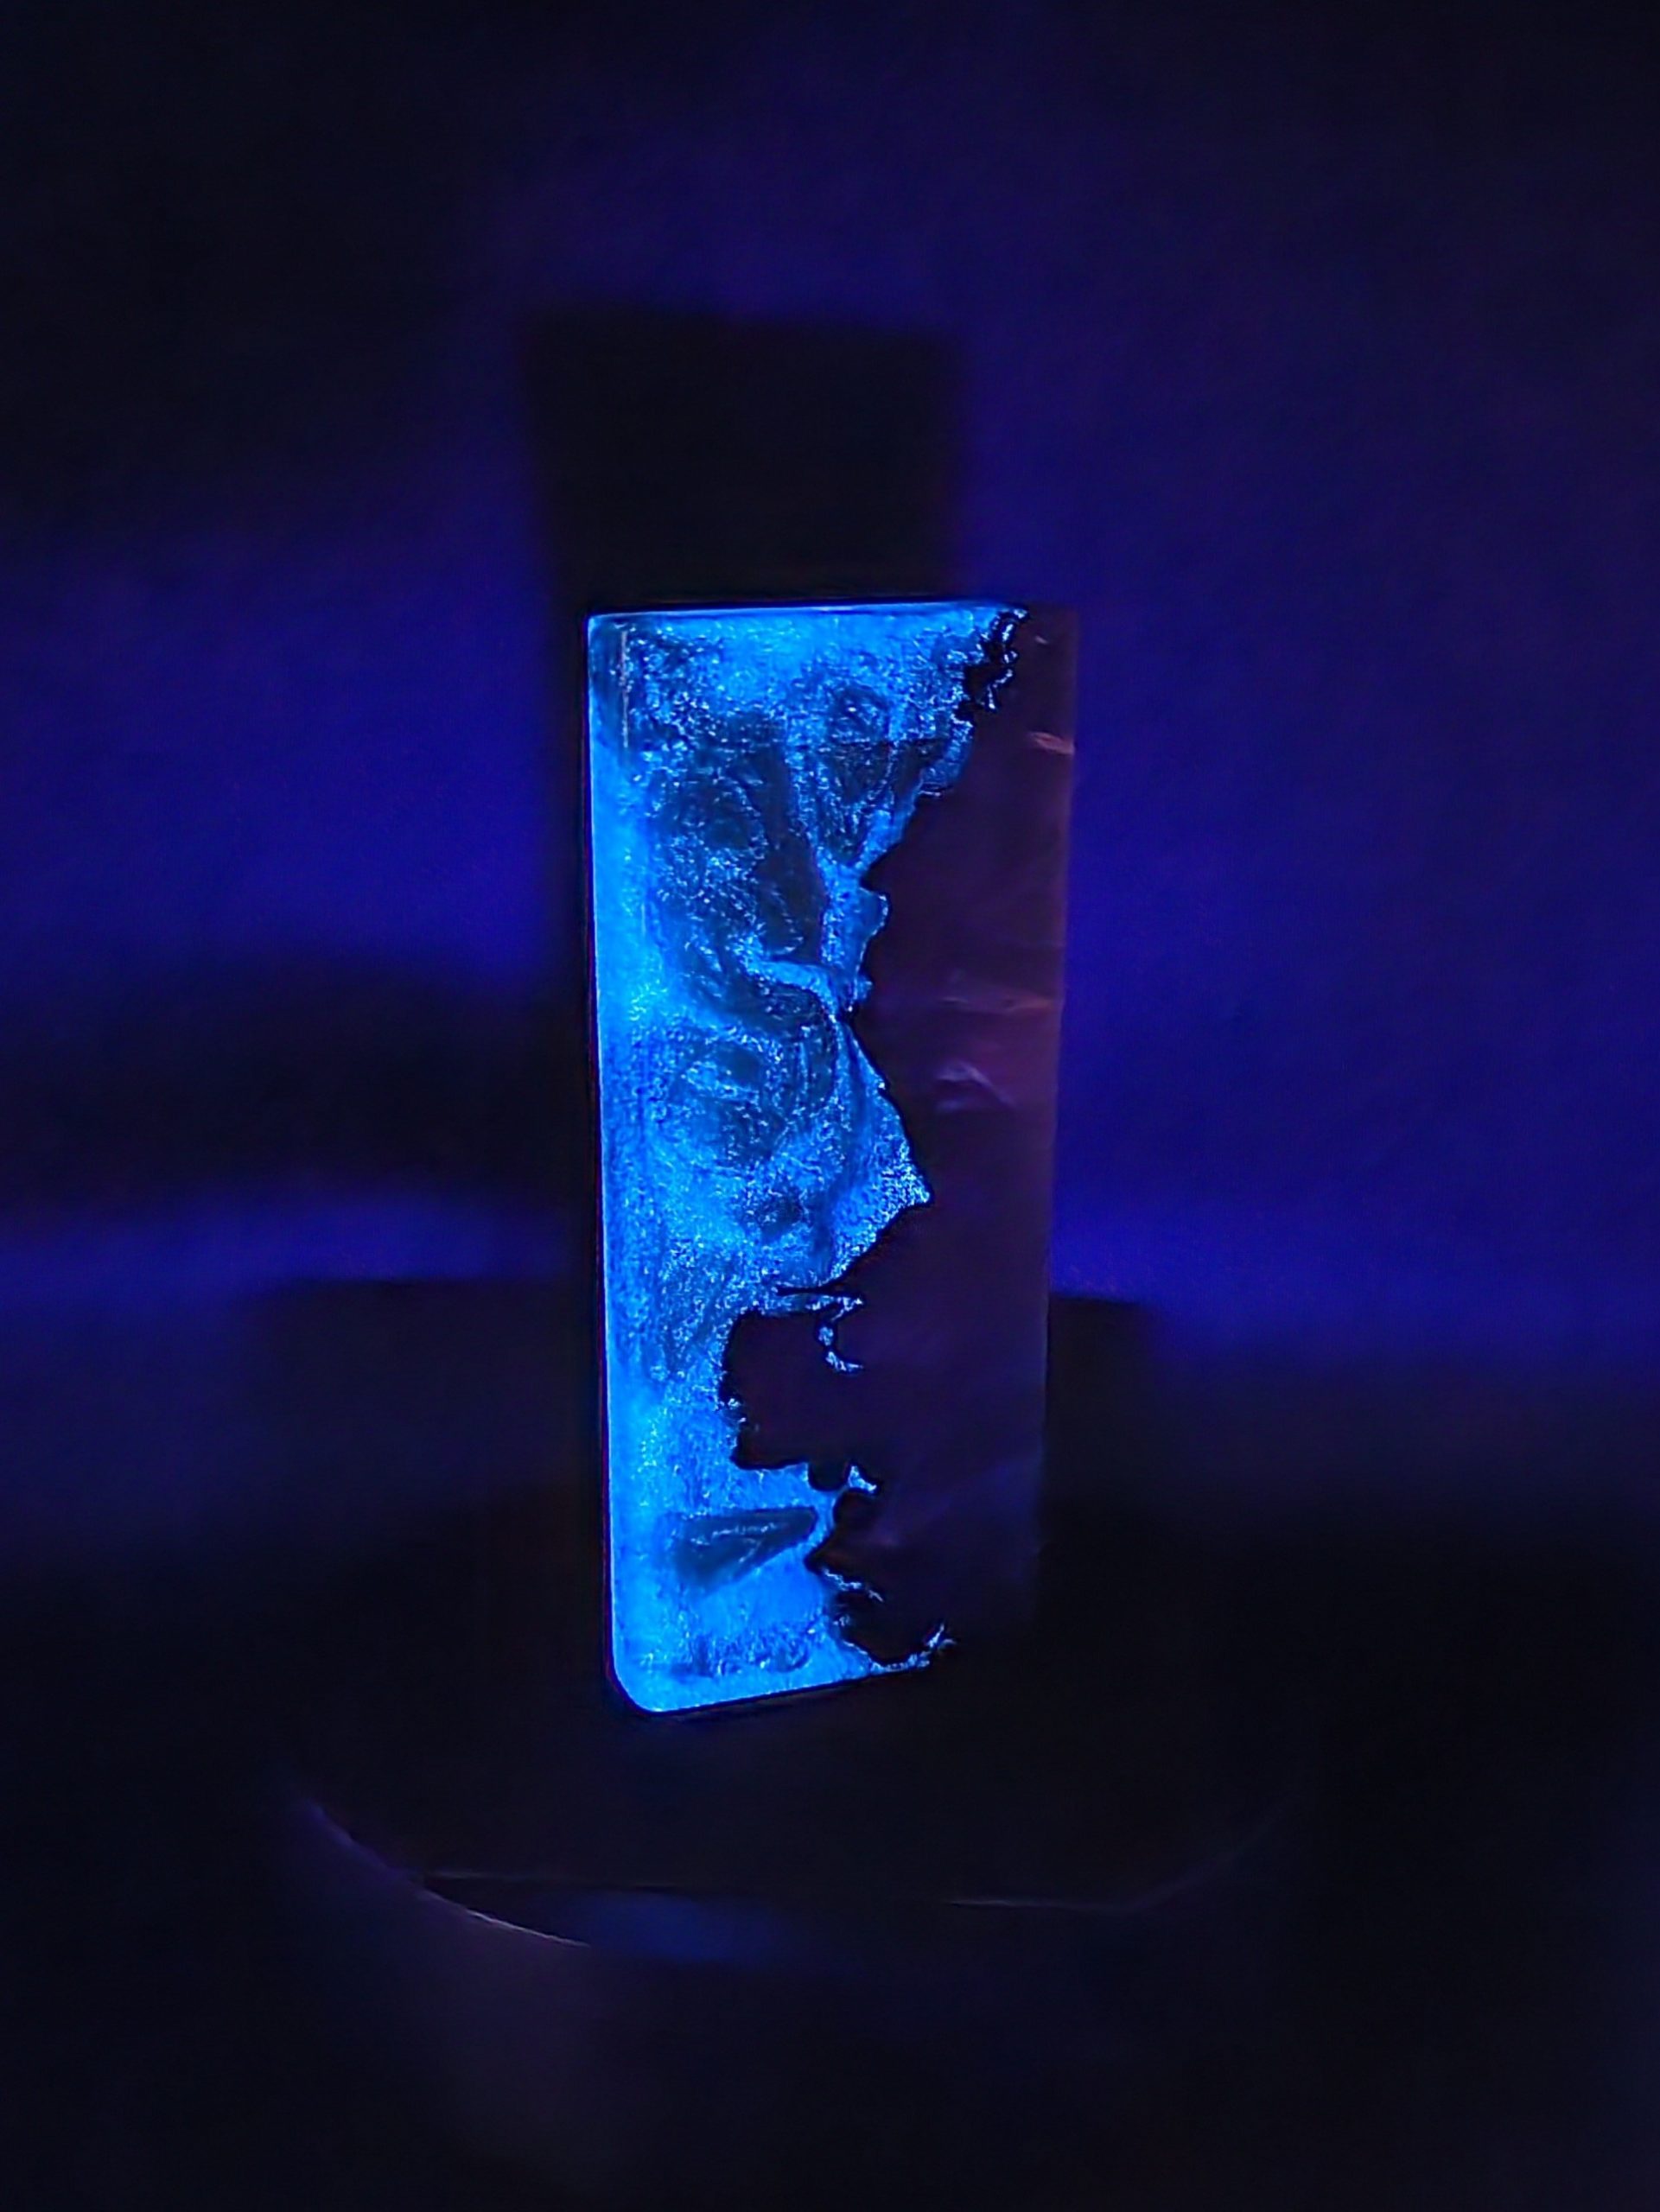 This image portrays 2G-Stash-Burl Hybrid-XL & Standard-Luminescent Dual Dynavap Case by Dovetail Woodwork.